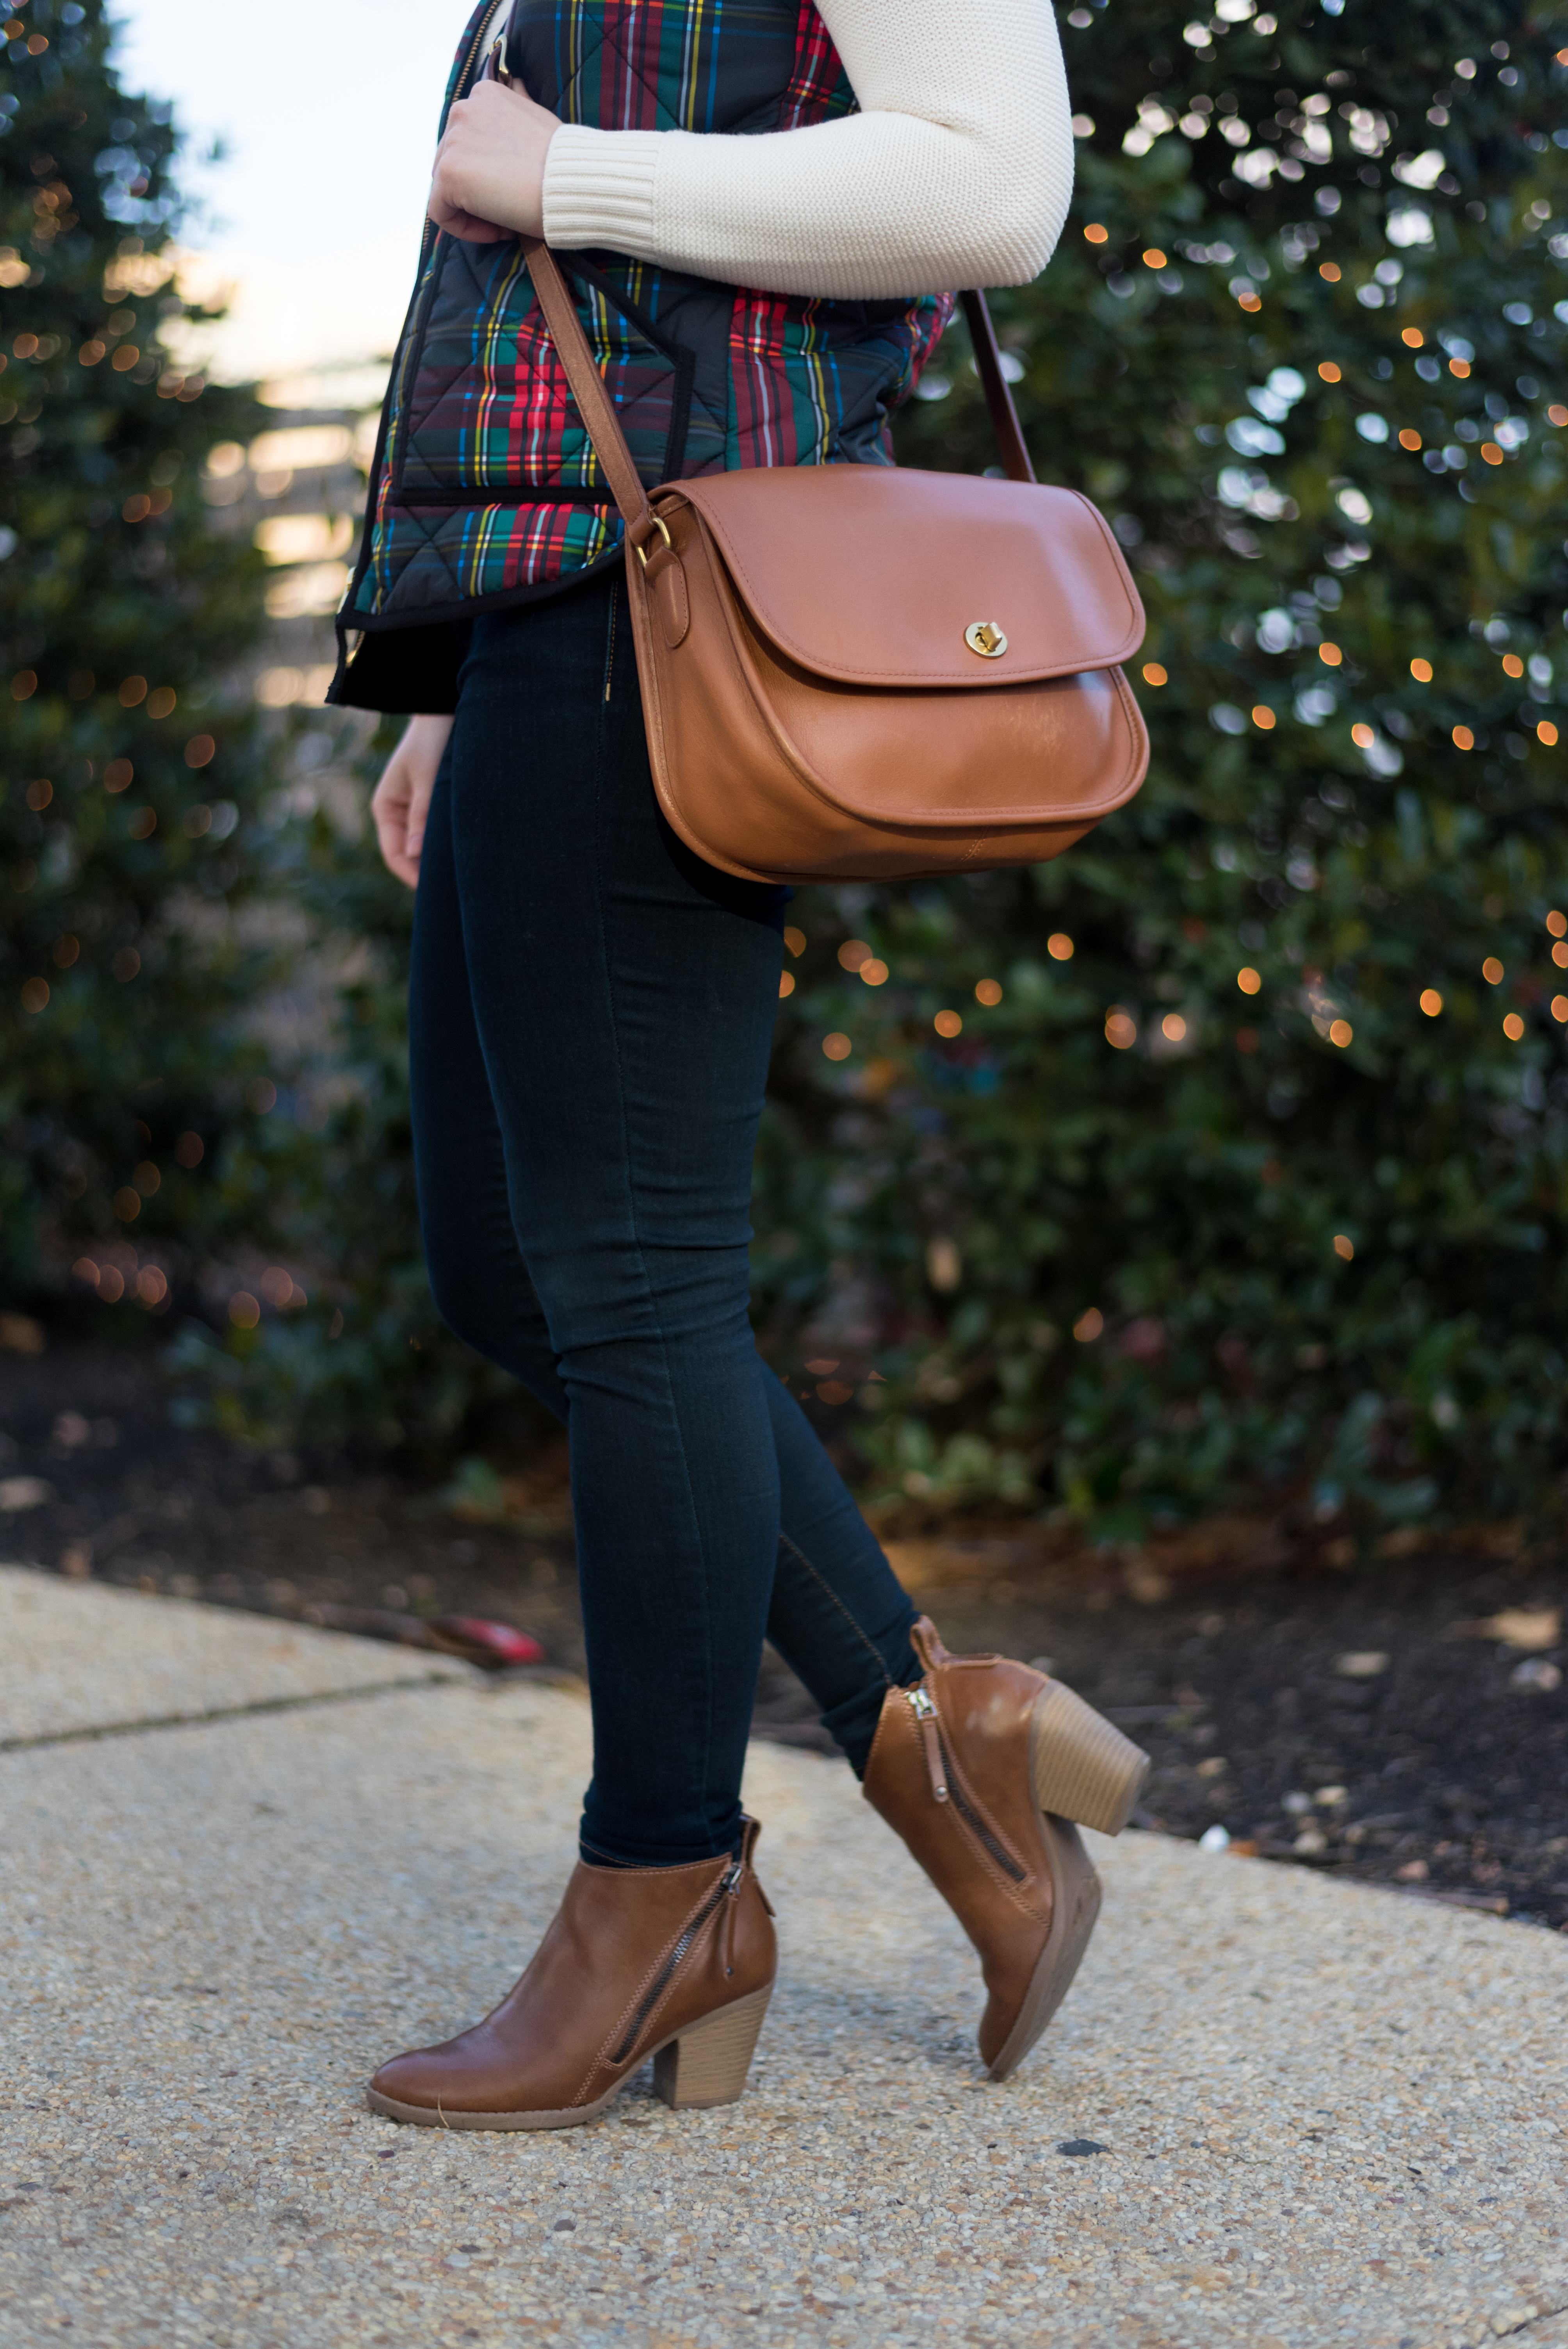 My 2018 Word of the Year, a Reader Survey, AND Giveaway (oh my!) | Something Good, @danaerinw , j.crew plaid vest, plaid vest, aeo jeans, jeggings, dark denim, dark jeans, coach city classic, crossbody bag, cognac purse, target ankle boots, ankle boots, cognac boots, women's clothing, shoes, boots, white sweater